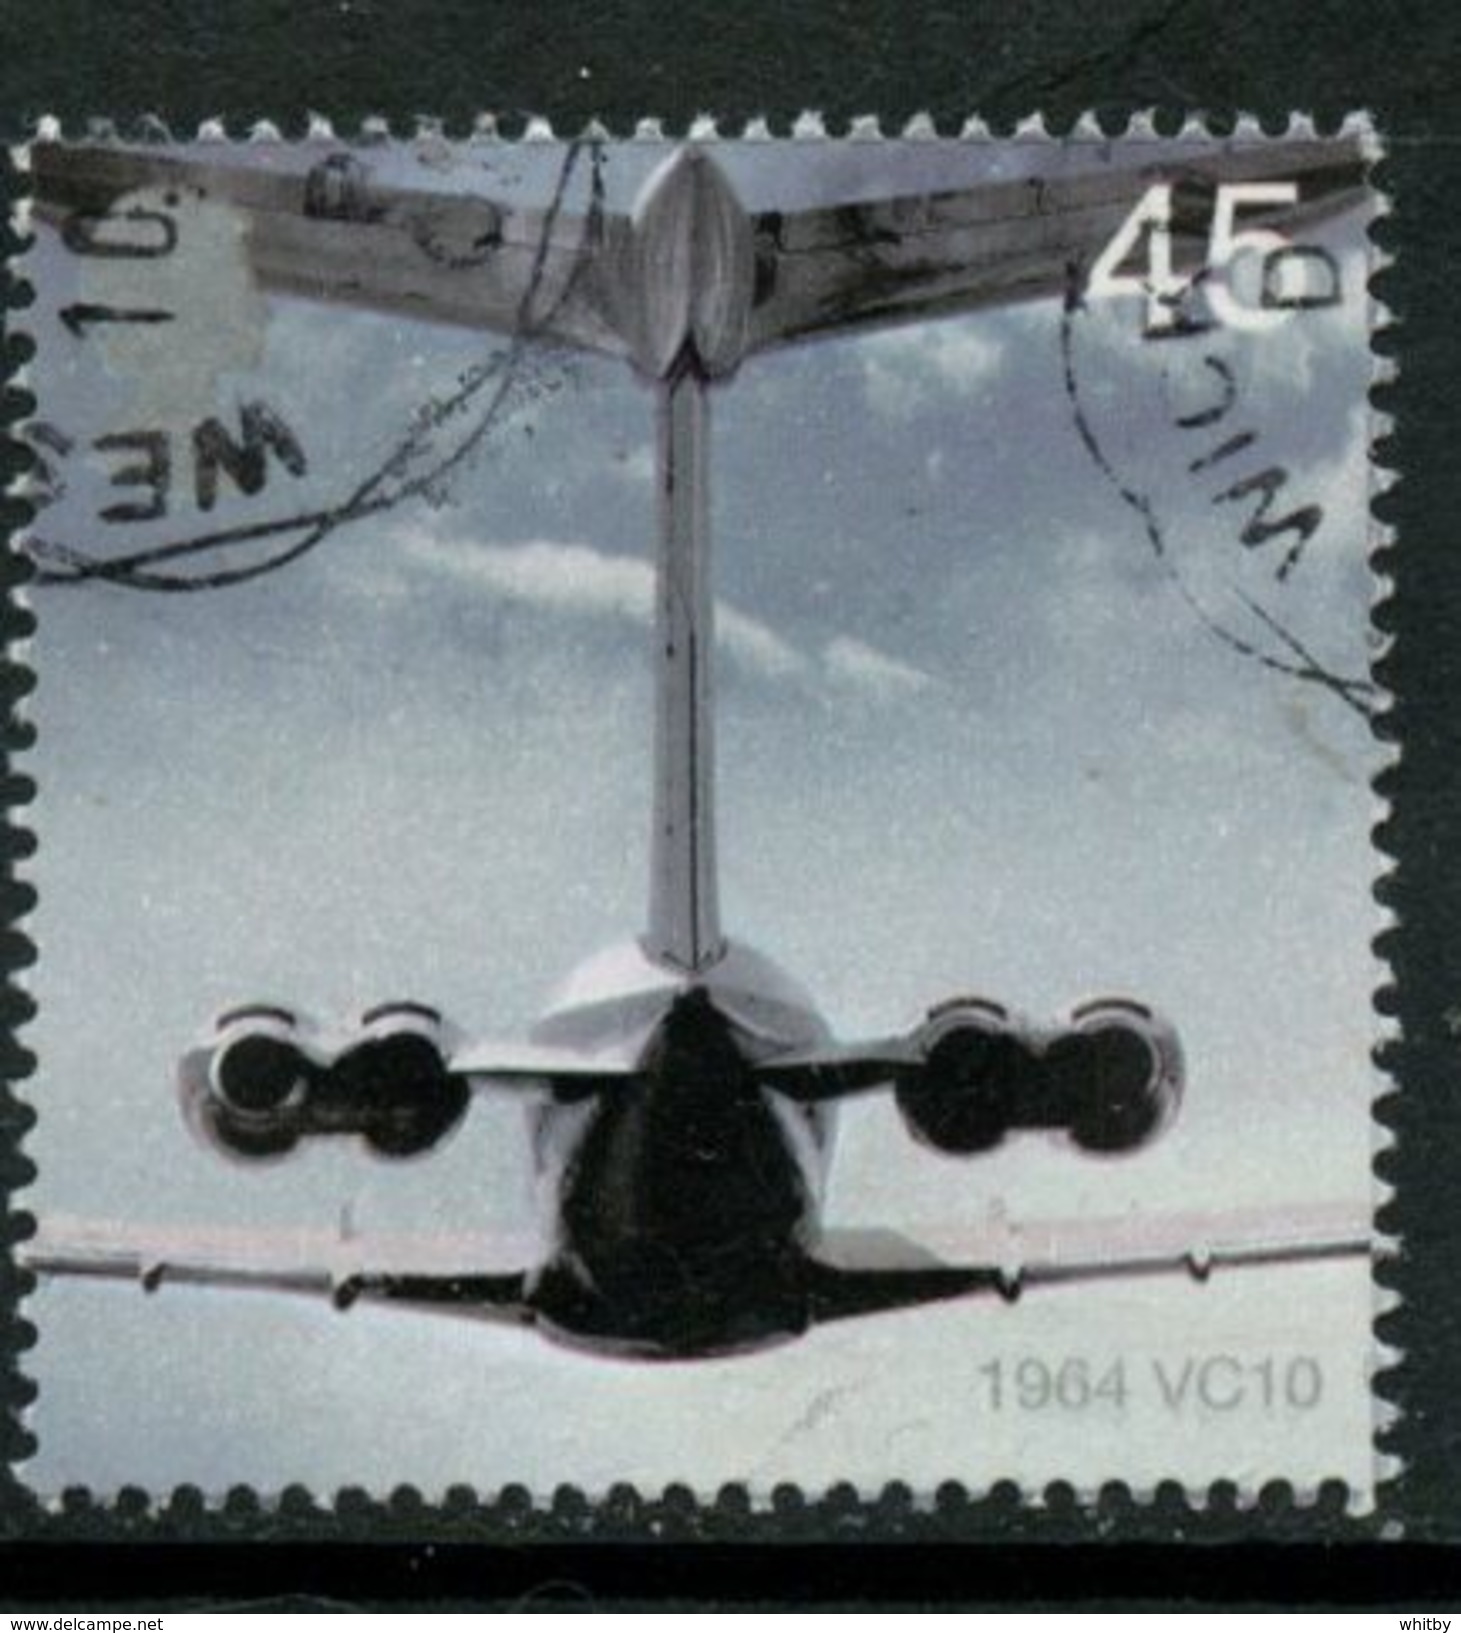 Great Britain 2002 45p VC10 Jet Issue #2051 - Used Stamps